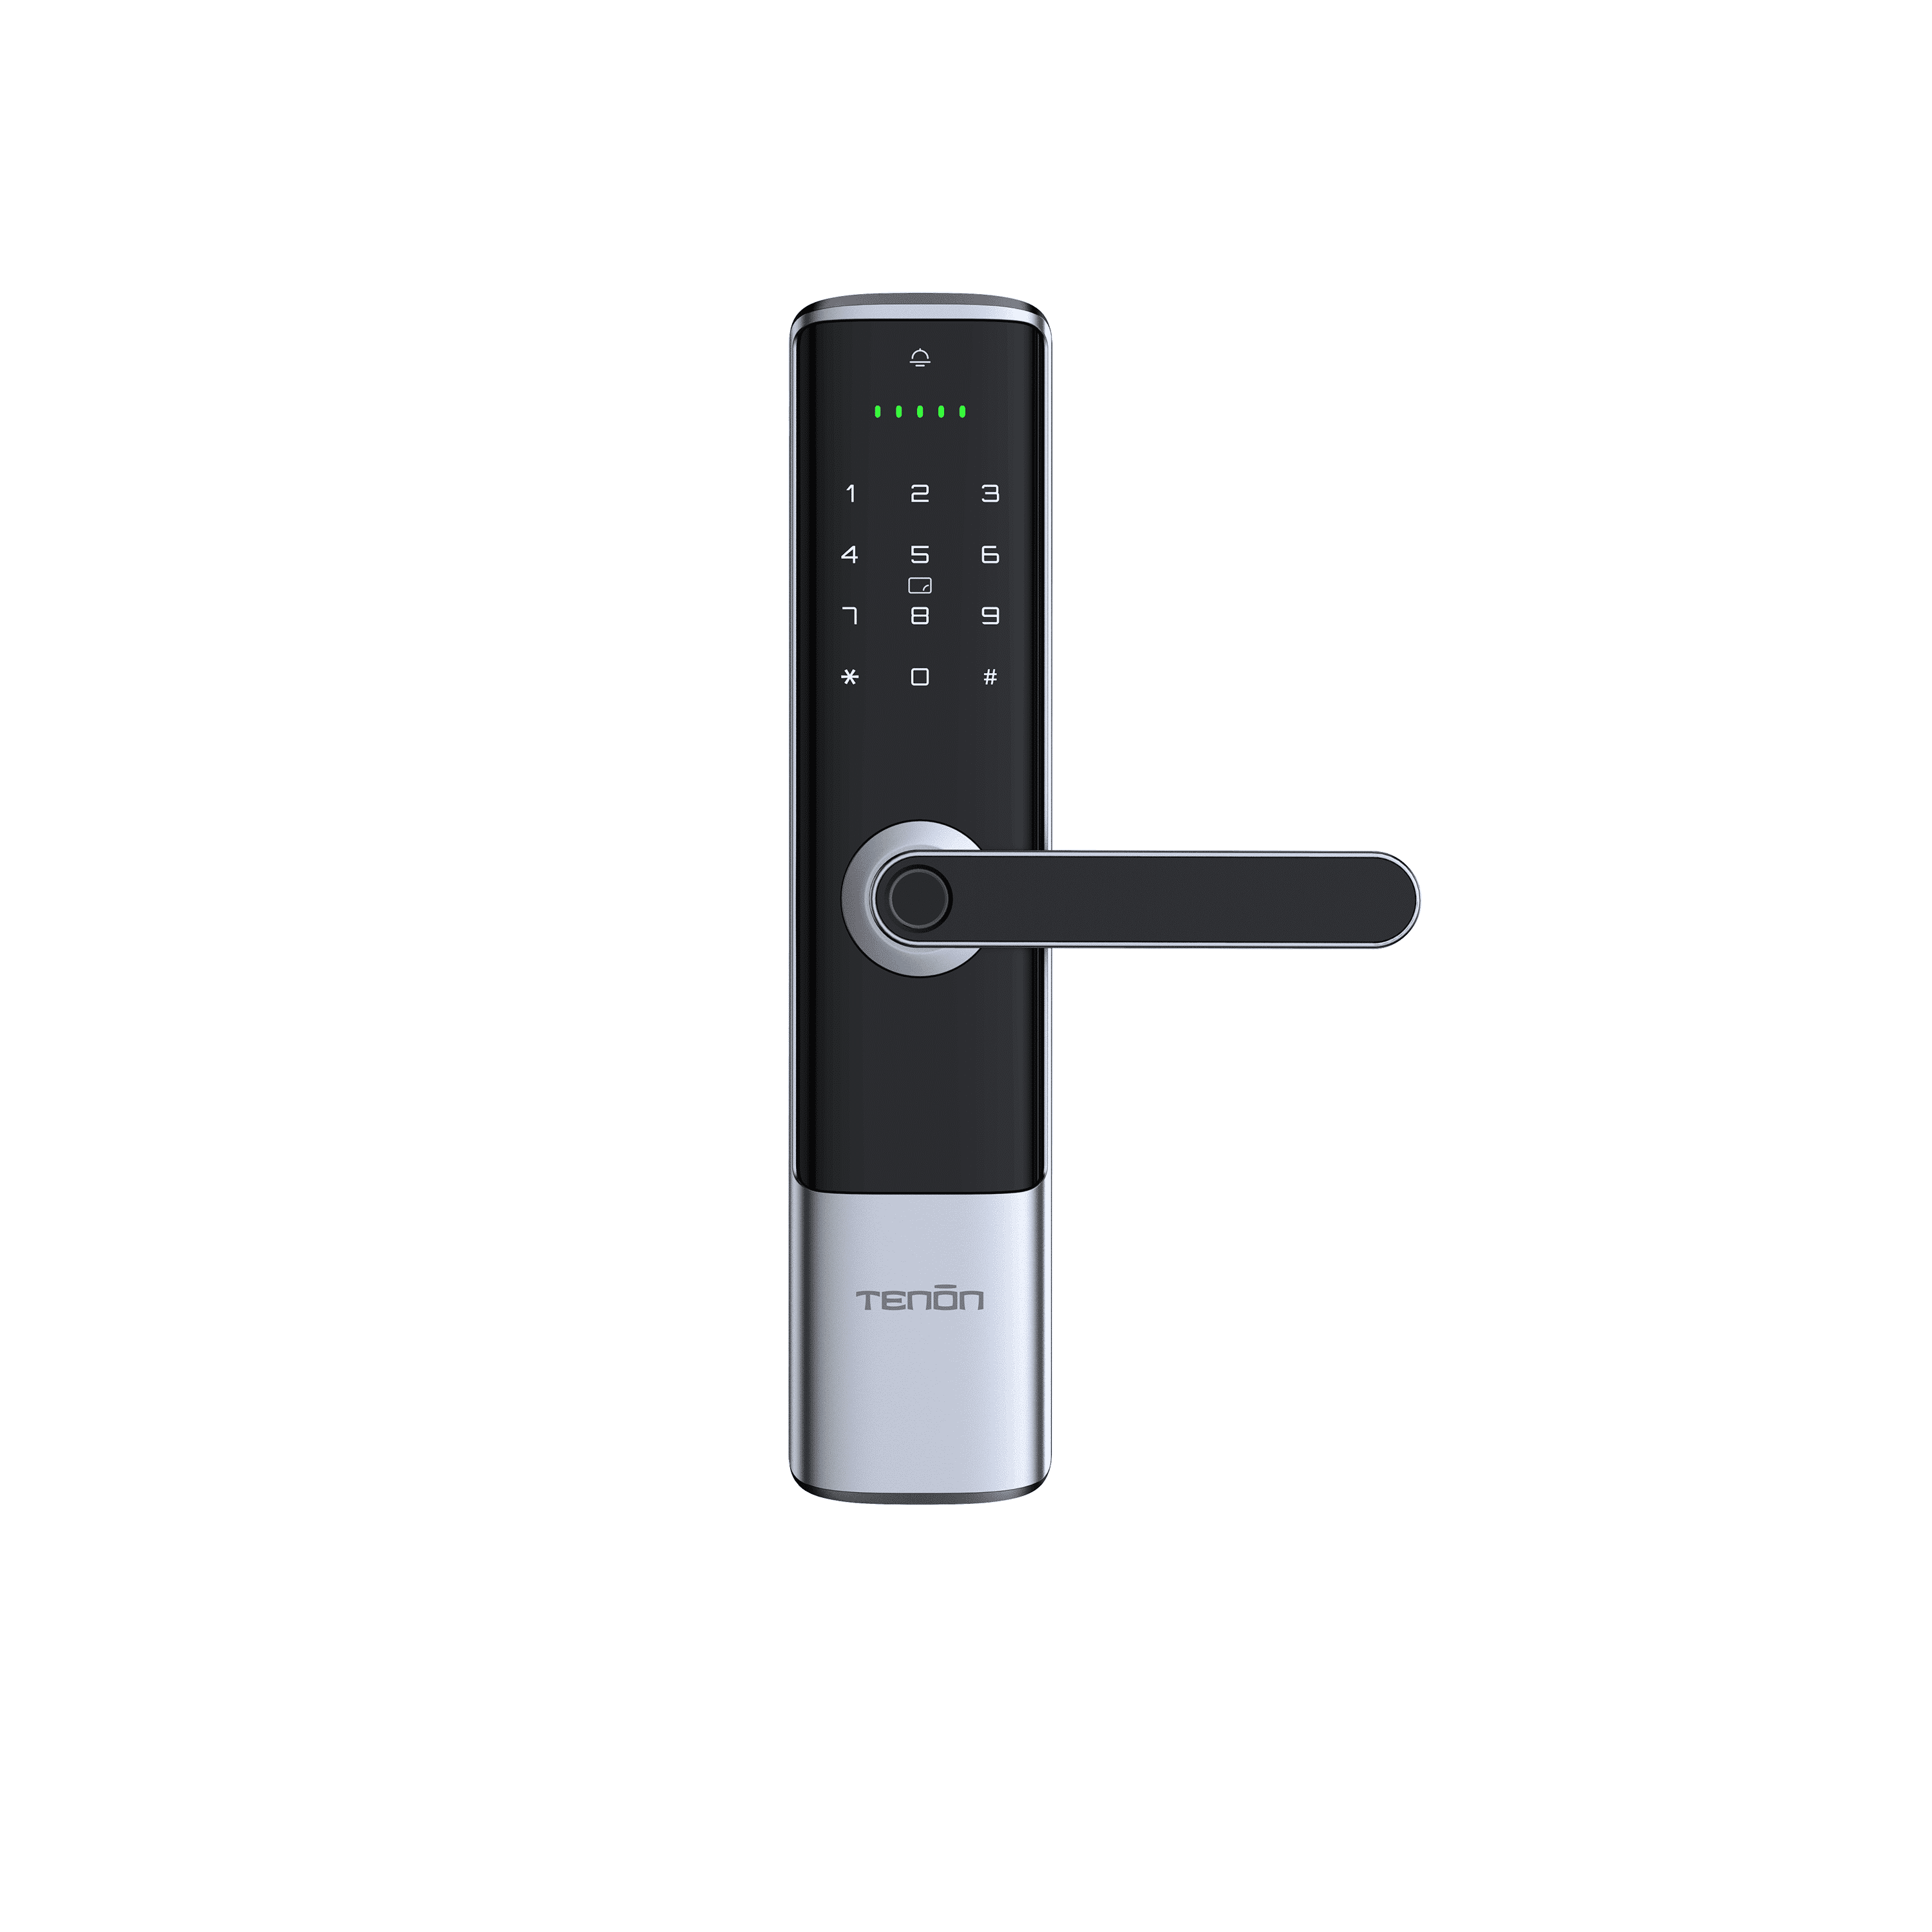 Electronic Smartbell Minmalist Designs Smart Bluetooth Lever Lock